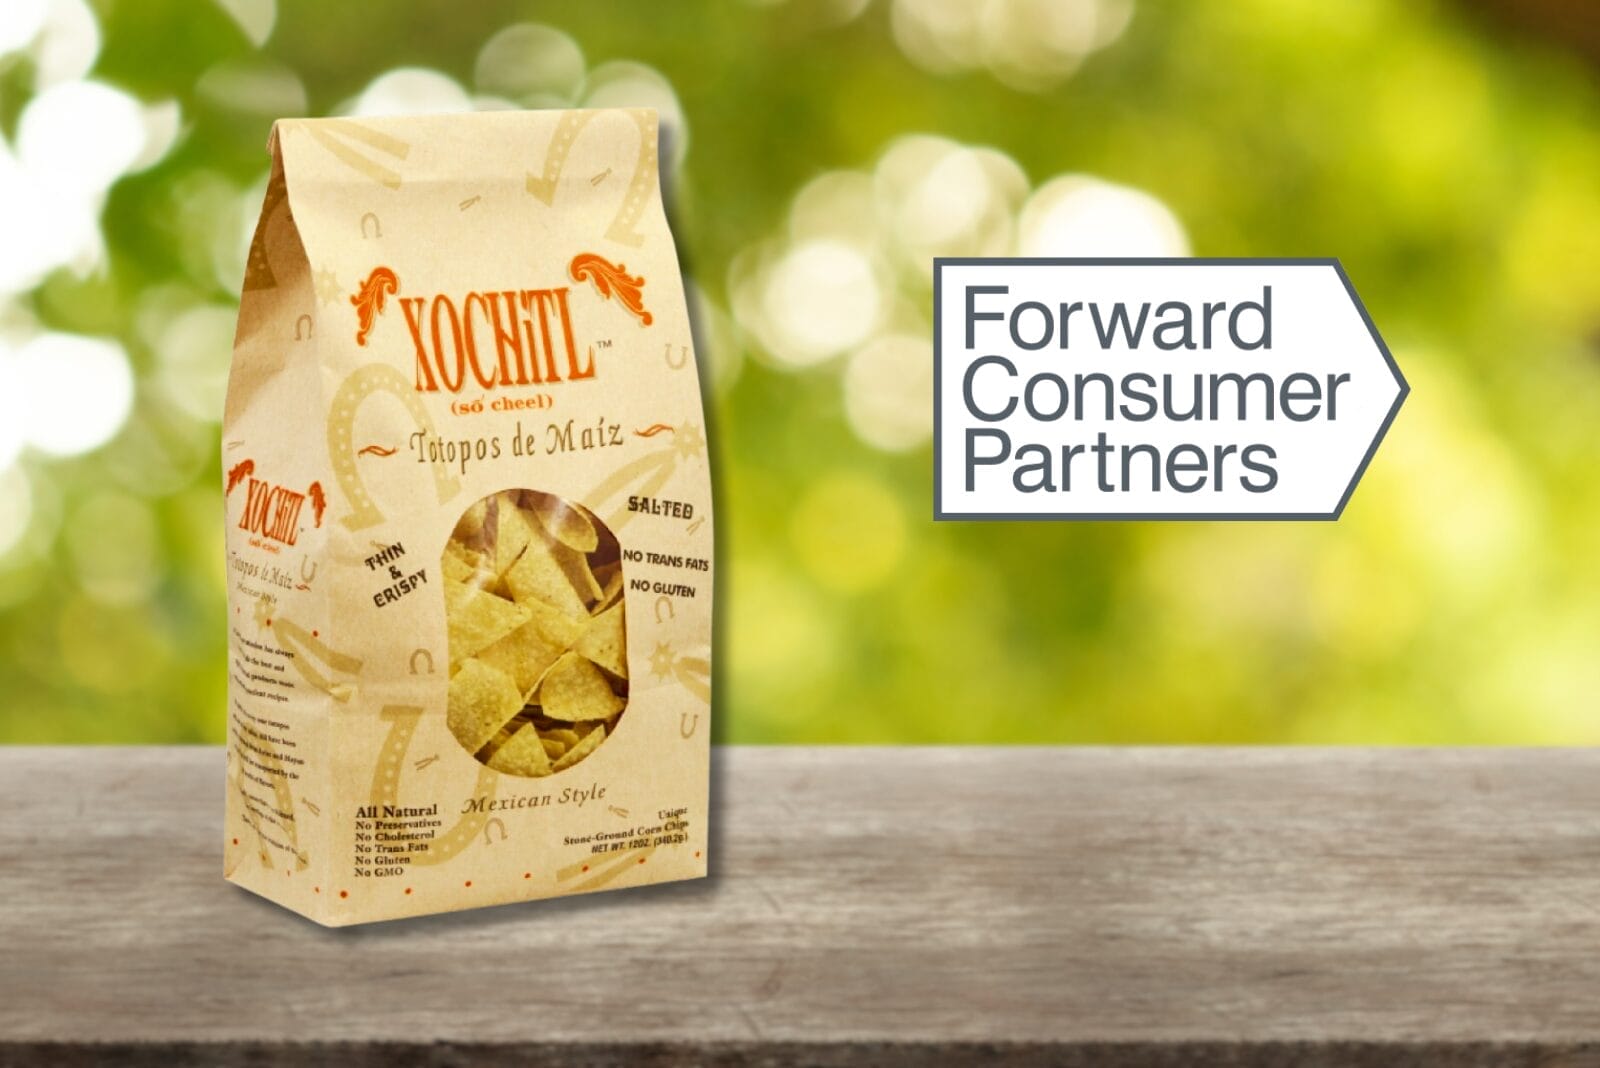 Bag of Xochitl tortilla chips on picnic table background with Forward Consumer Partners logo.